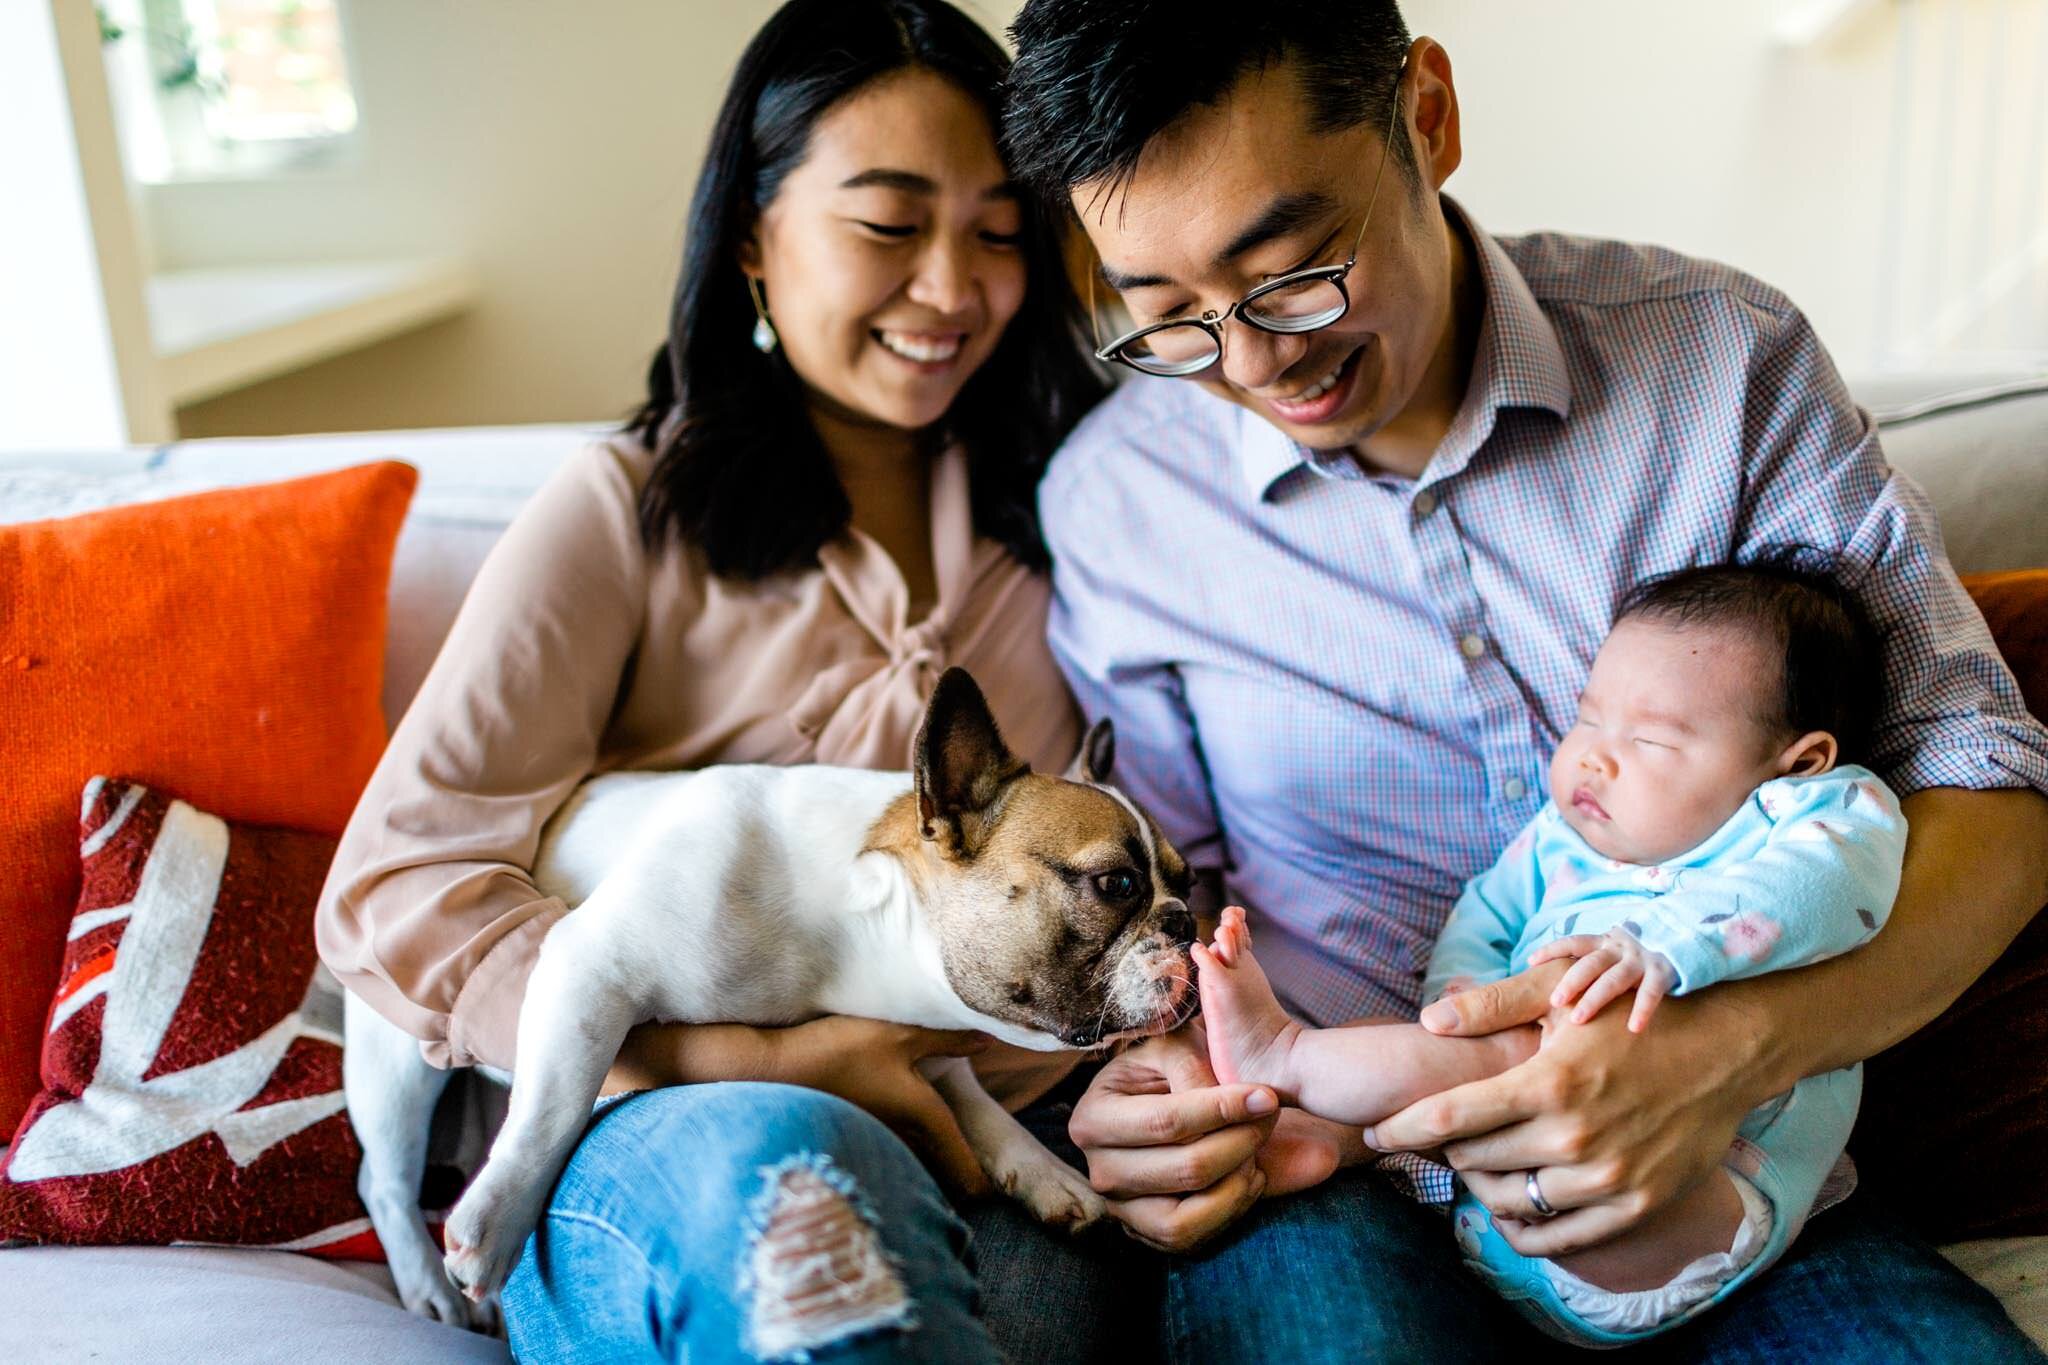 Raleigh Newborn Photographer | By G. Lin Photography | Dog licking baby's feet